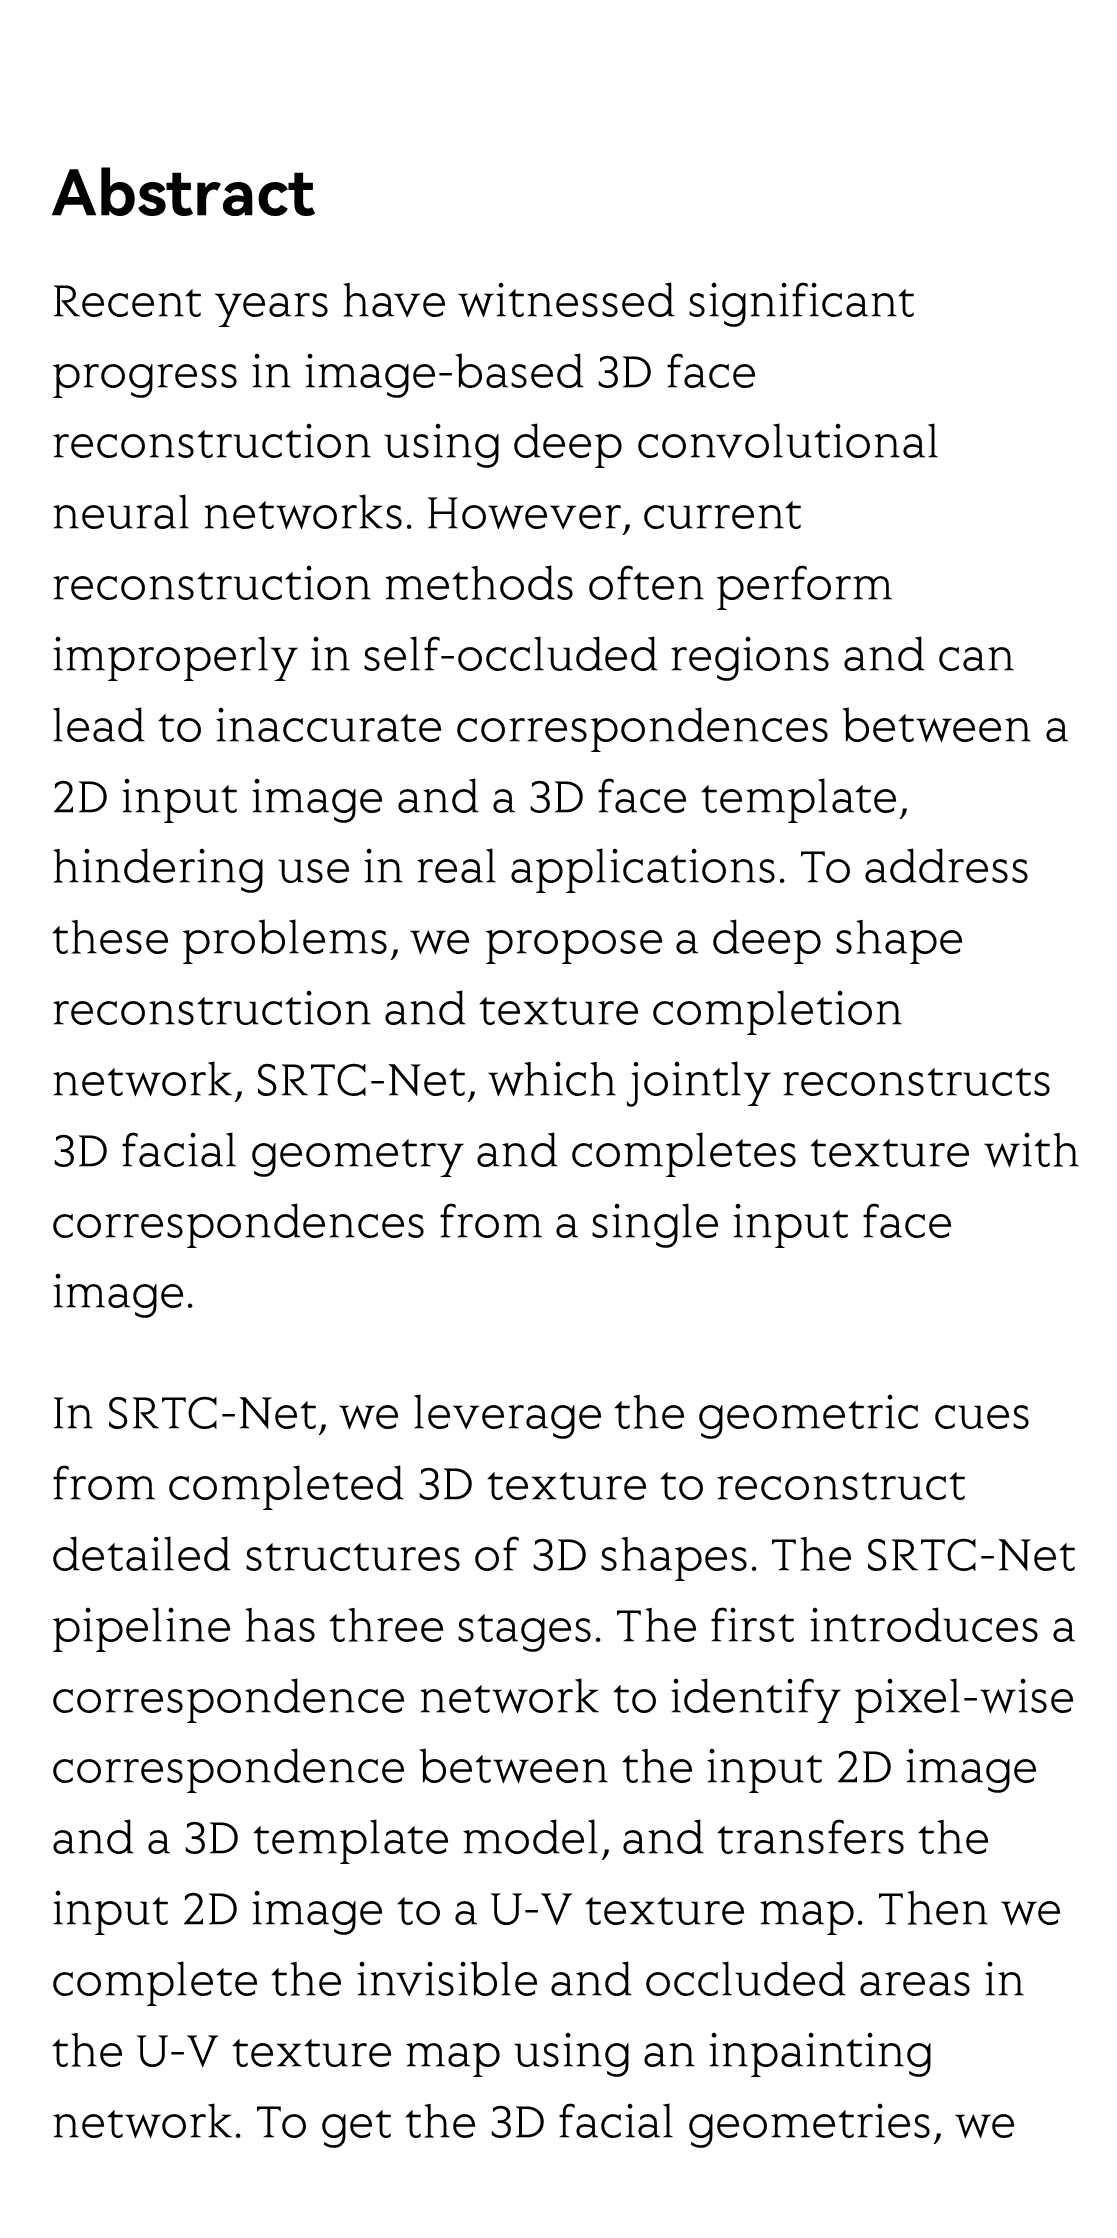 Joint 3D facial shape reconstruction and texture completion from a single image_2